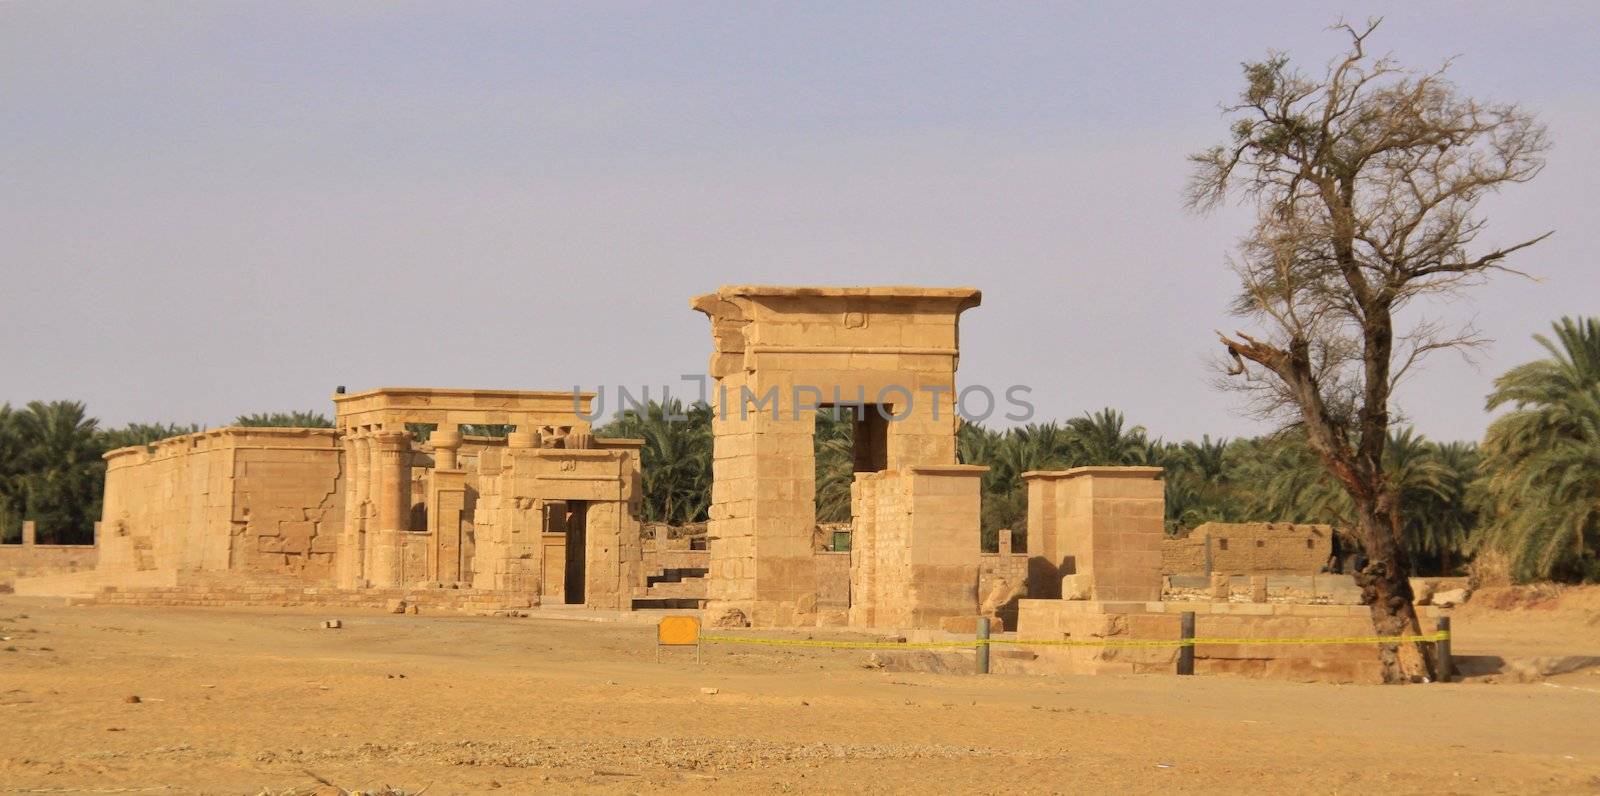 Hibis Temple in the Kharga Oasis. The largest and best preserved temple in the Kharga Oasis 